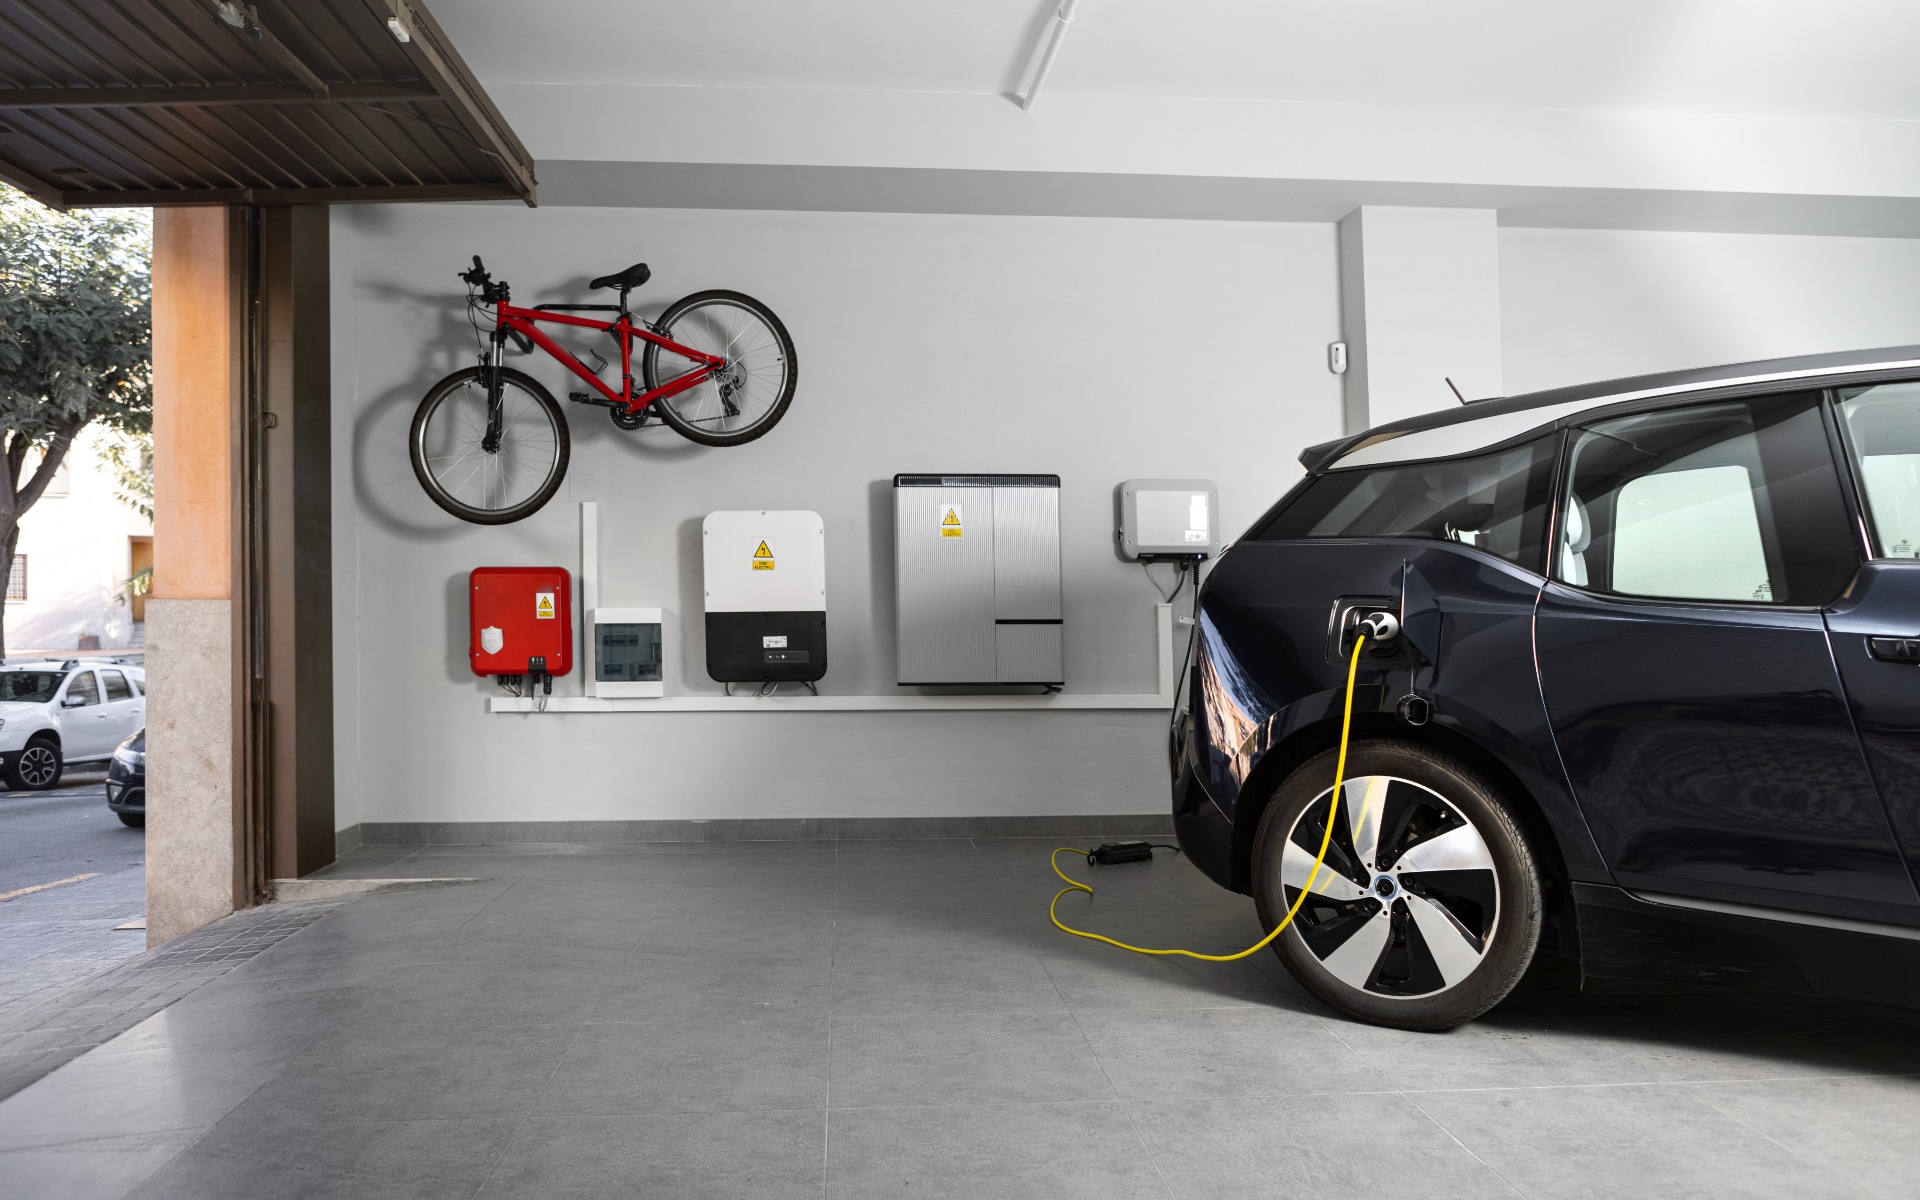 Bidirectional charging: What is it and What are the Benefits for EV drivers?